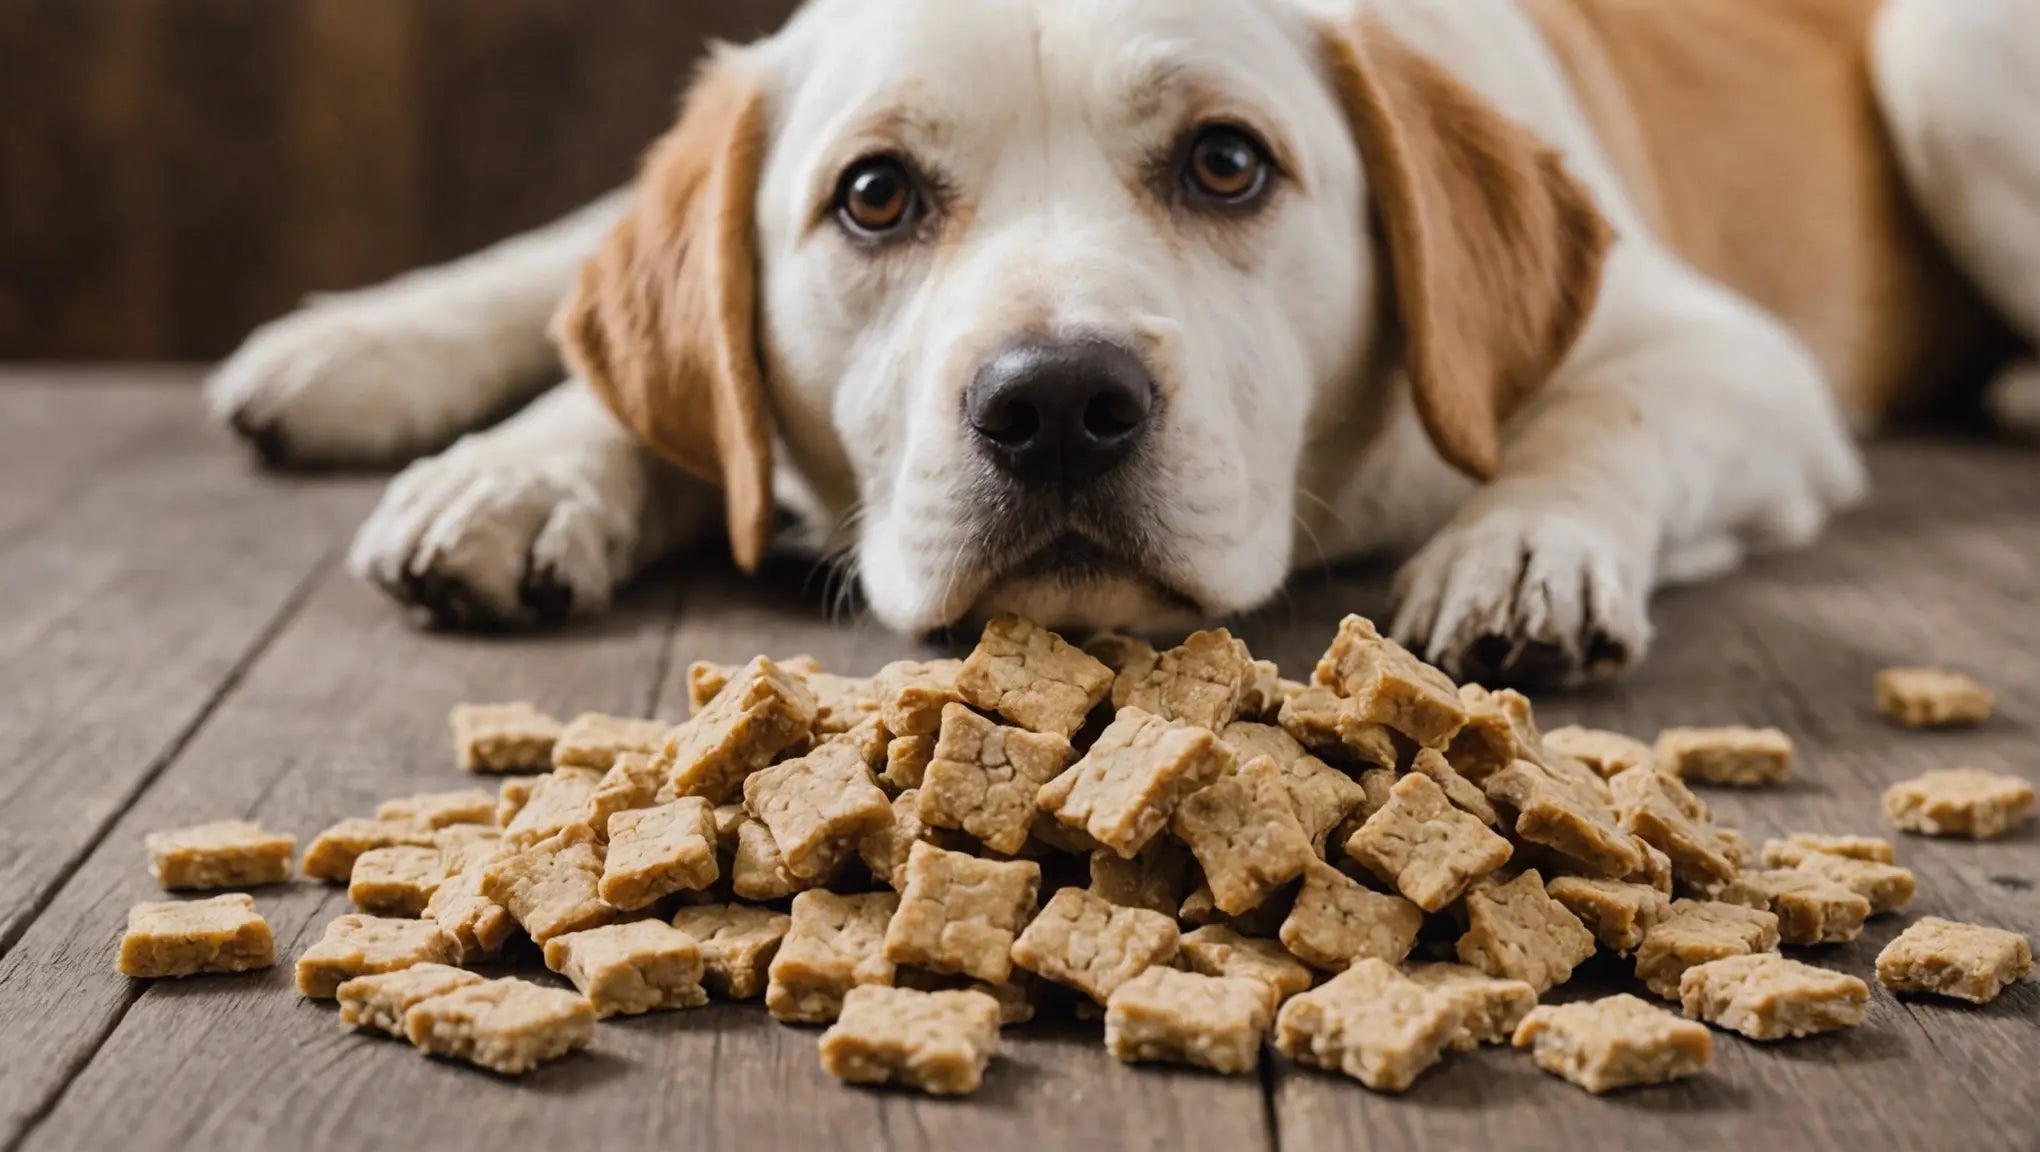 Premium Freeze Dried Dog Treats for Your Pup